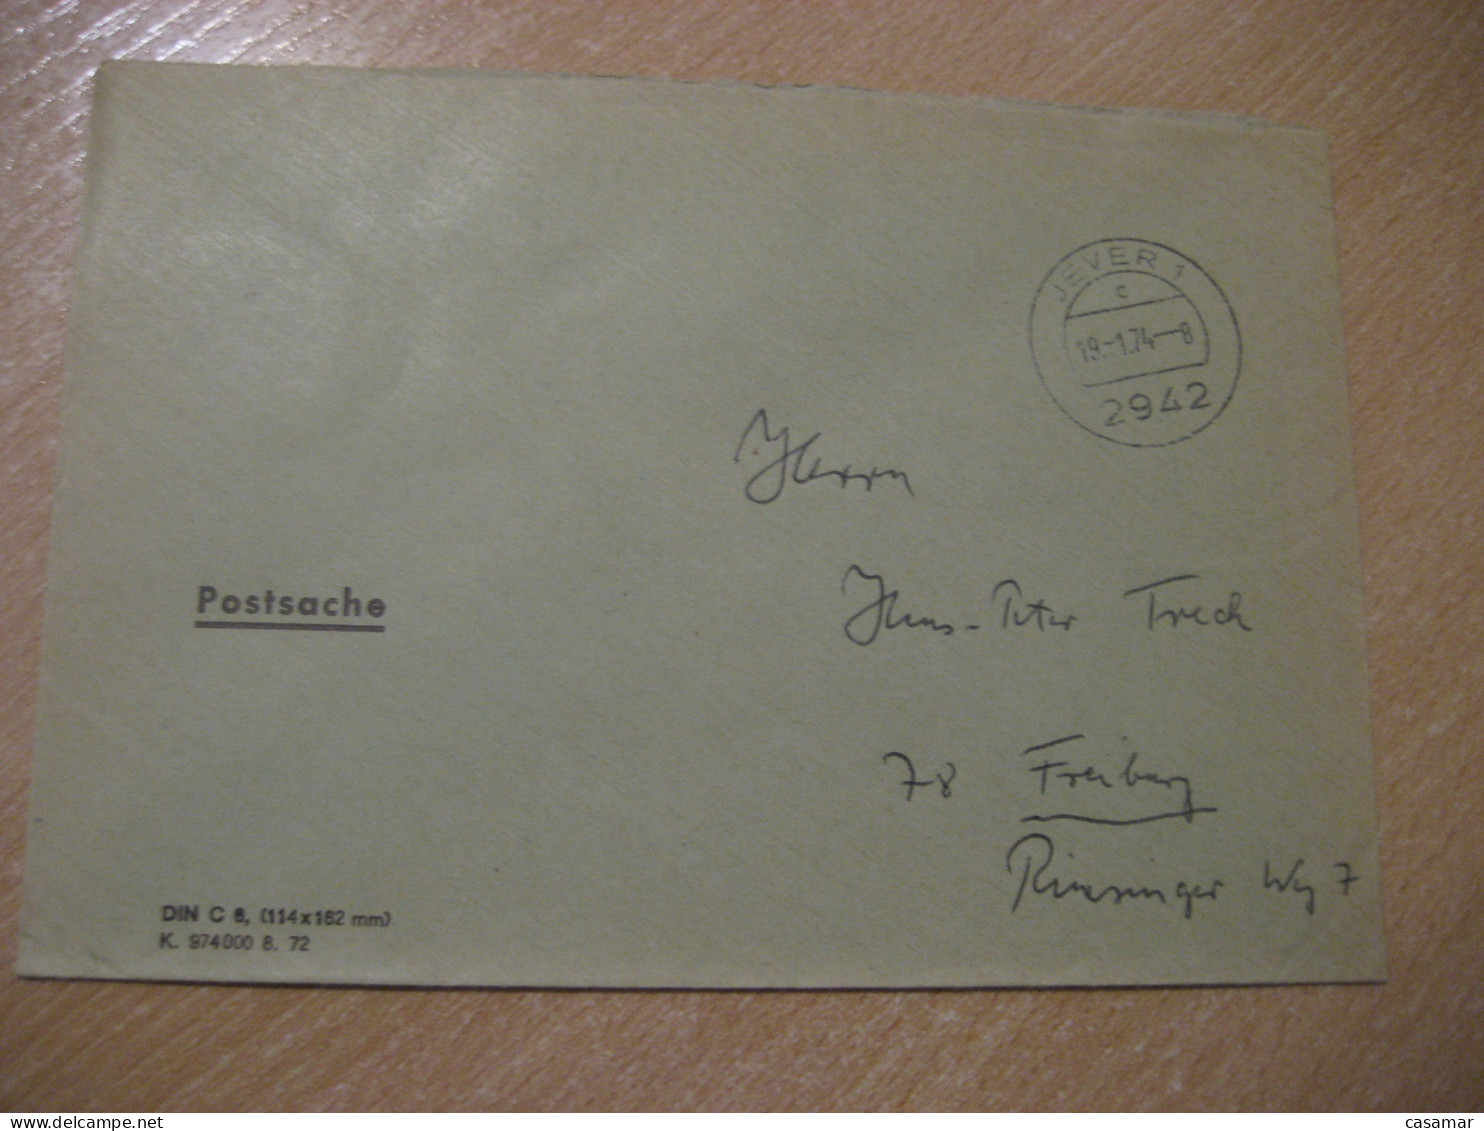 JEVER 1974 To Freiburg Postage Paid Cancel Cover GERMANY - Covers & Documents